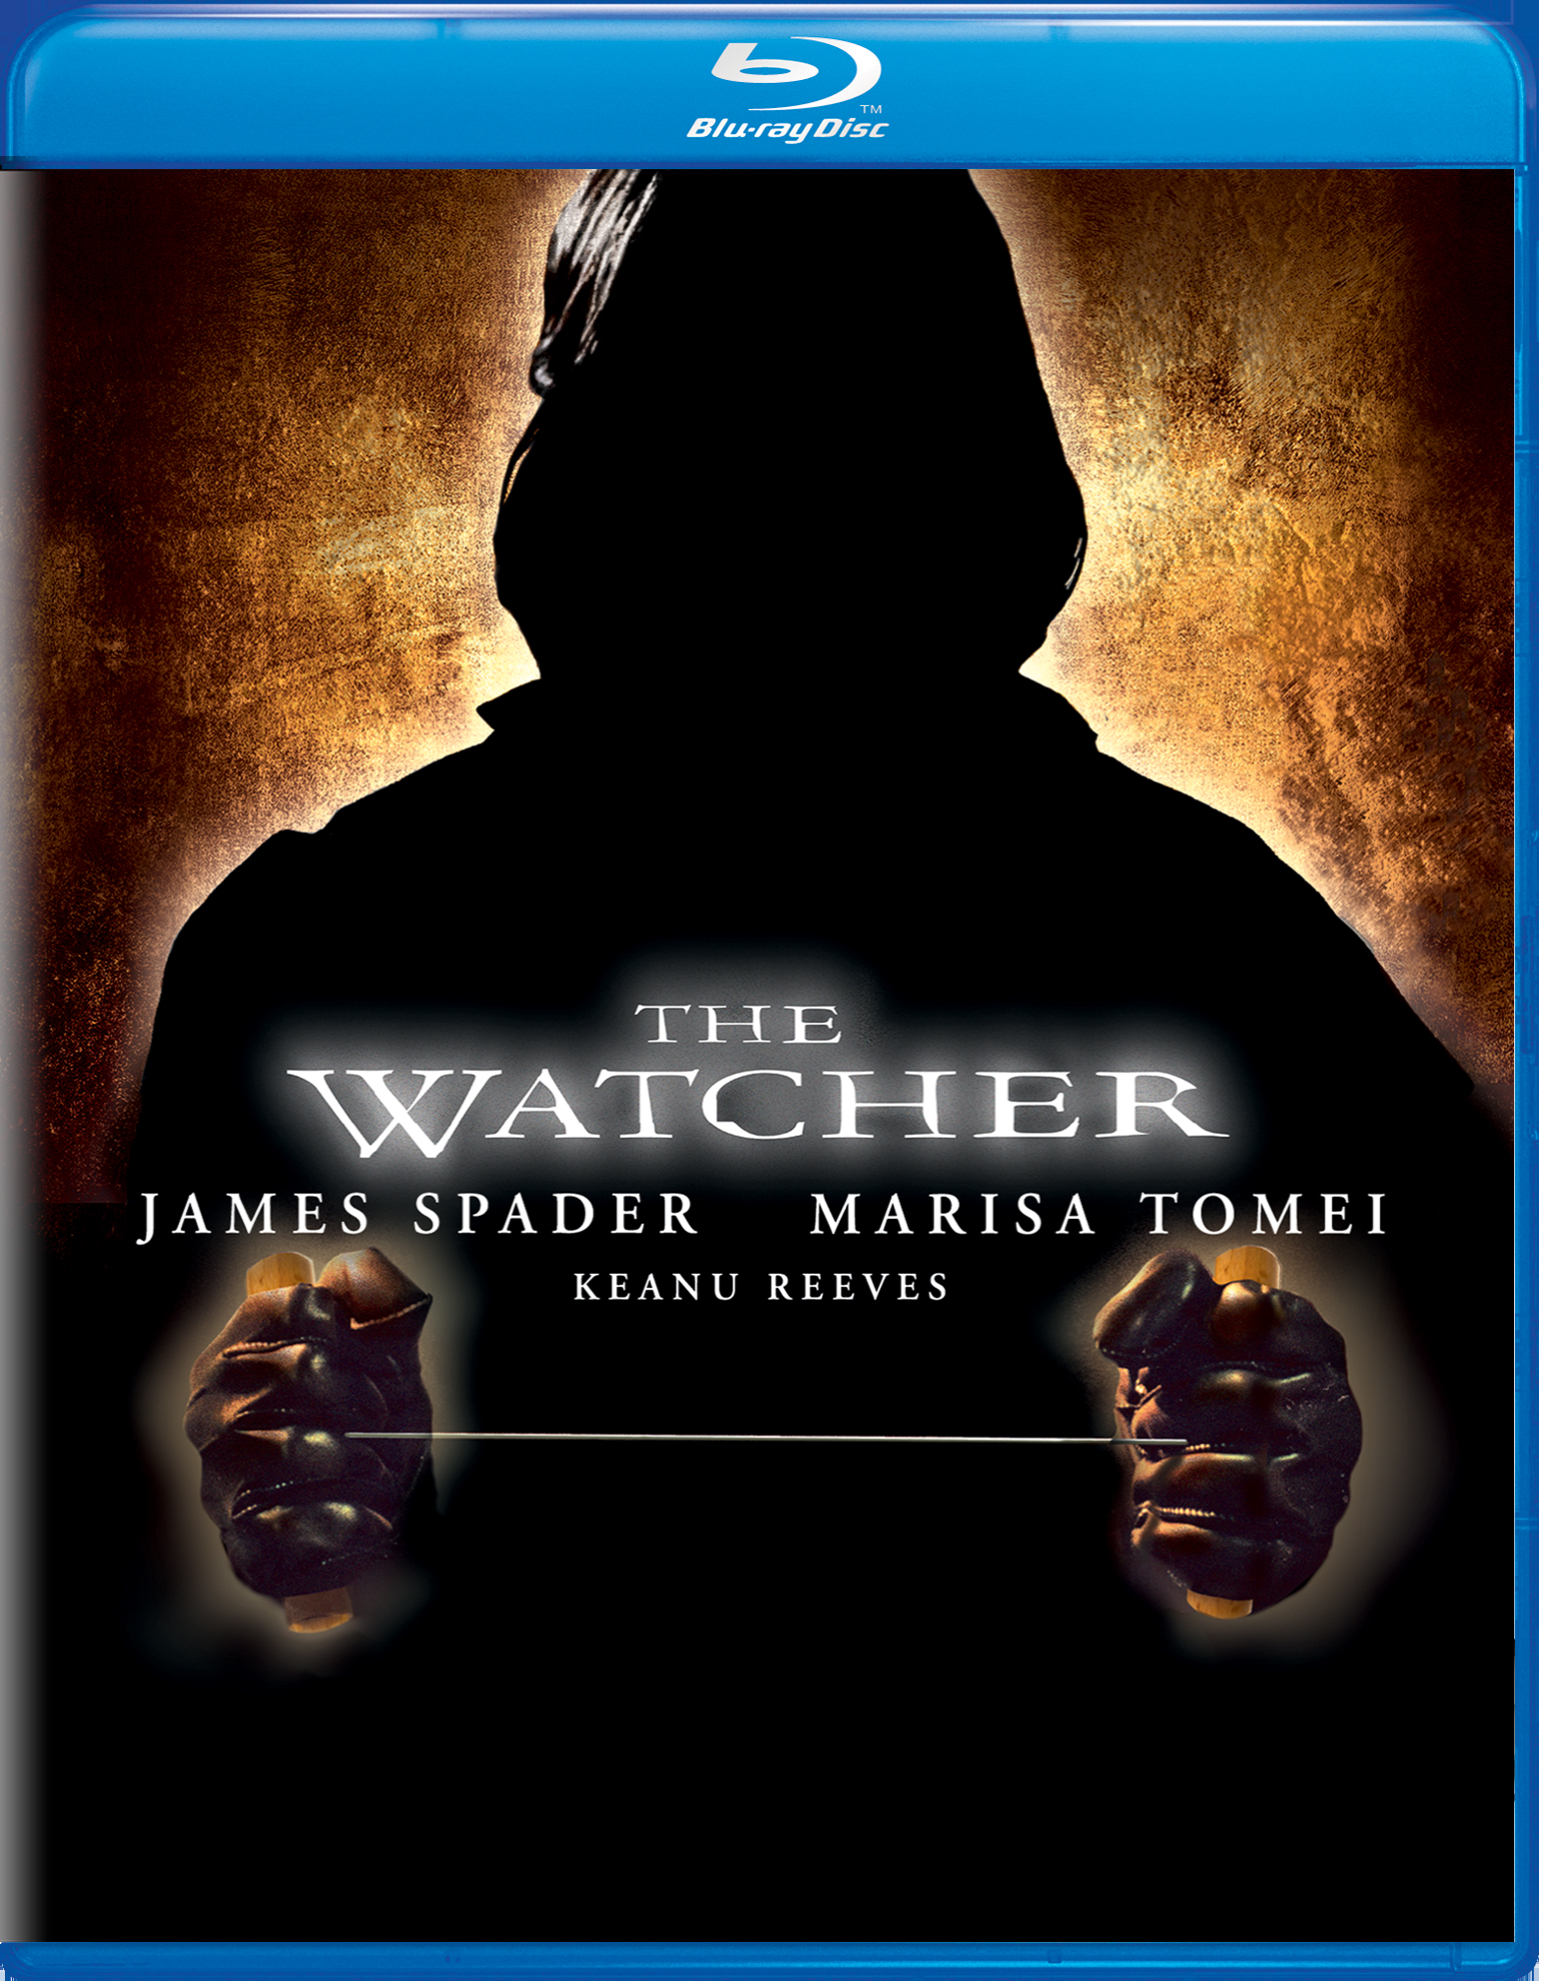 The Watcher - Blu-ray [ 2000 ]  - Thriller Movies On Blu-ray - Movies On GRUV